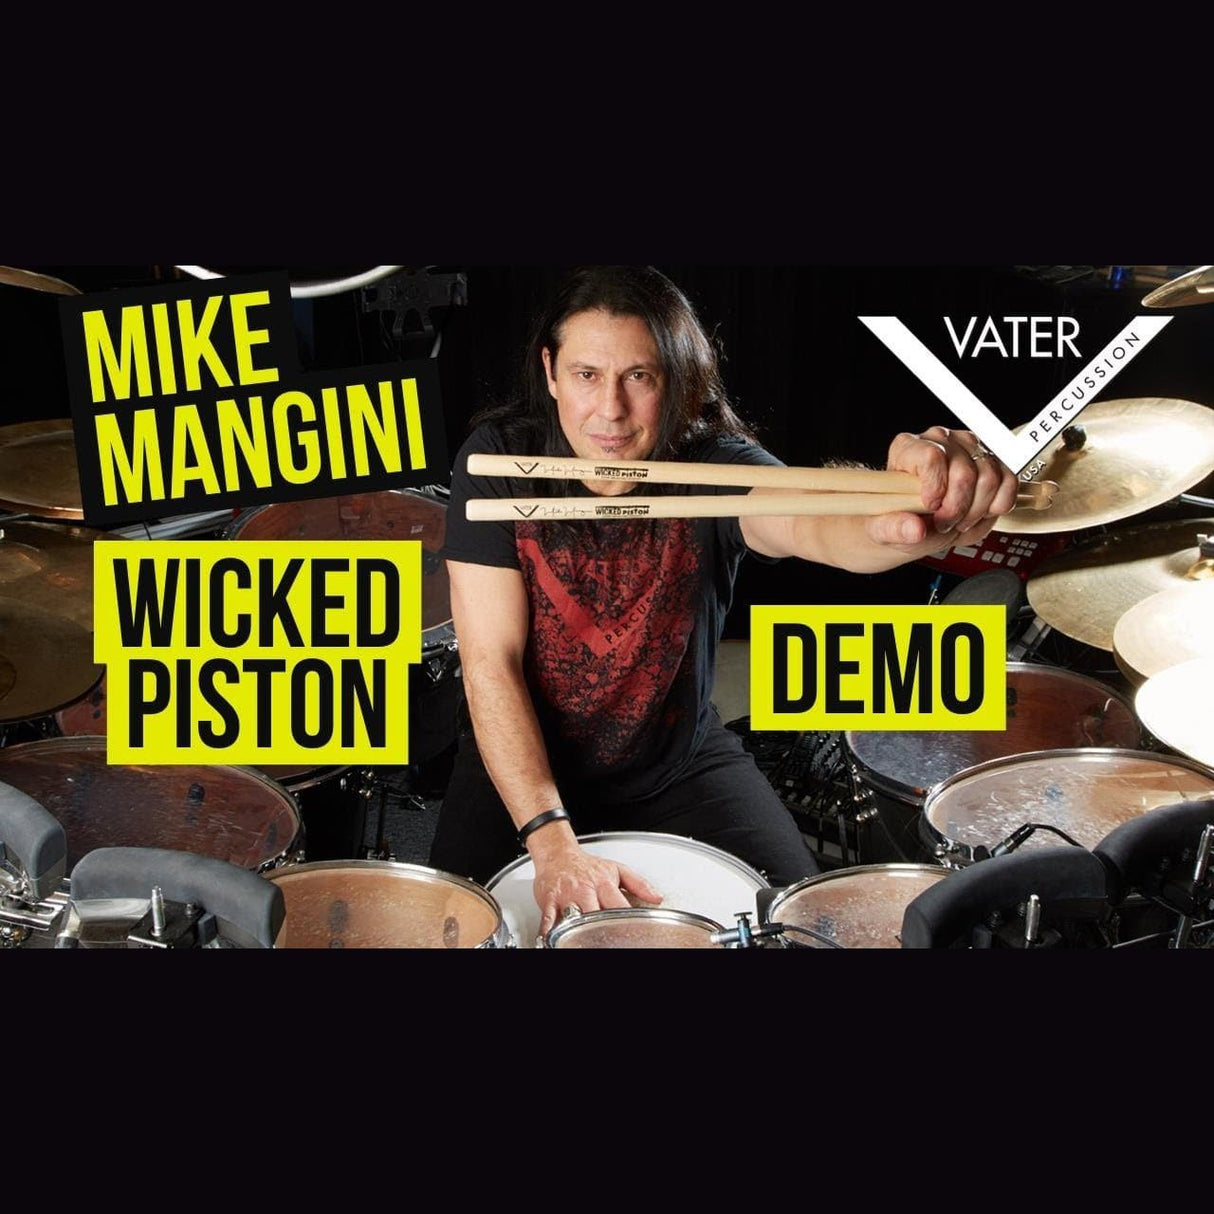 Vater Mike Mangini's Wicked Piston